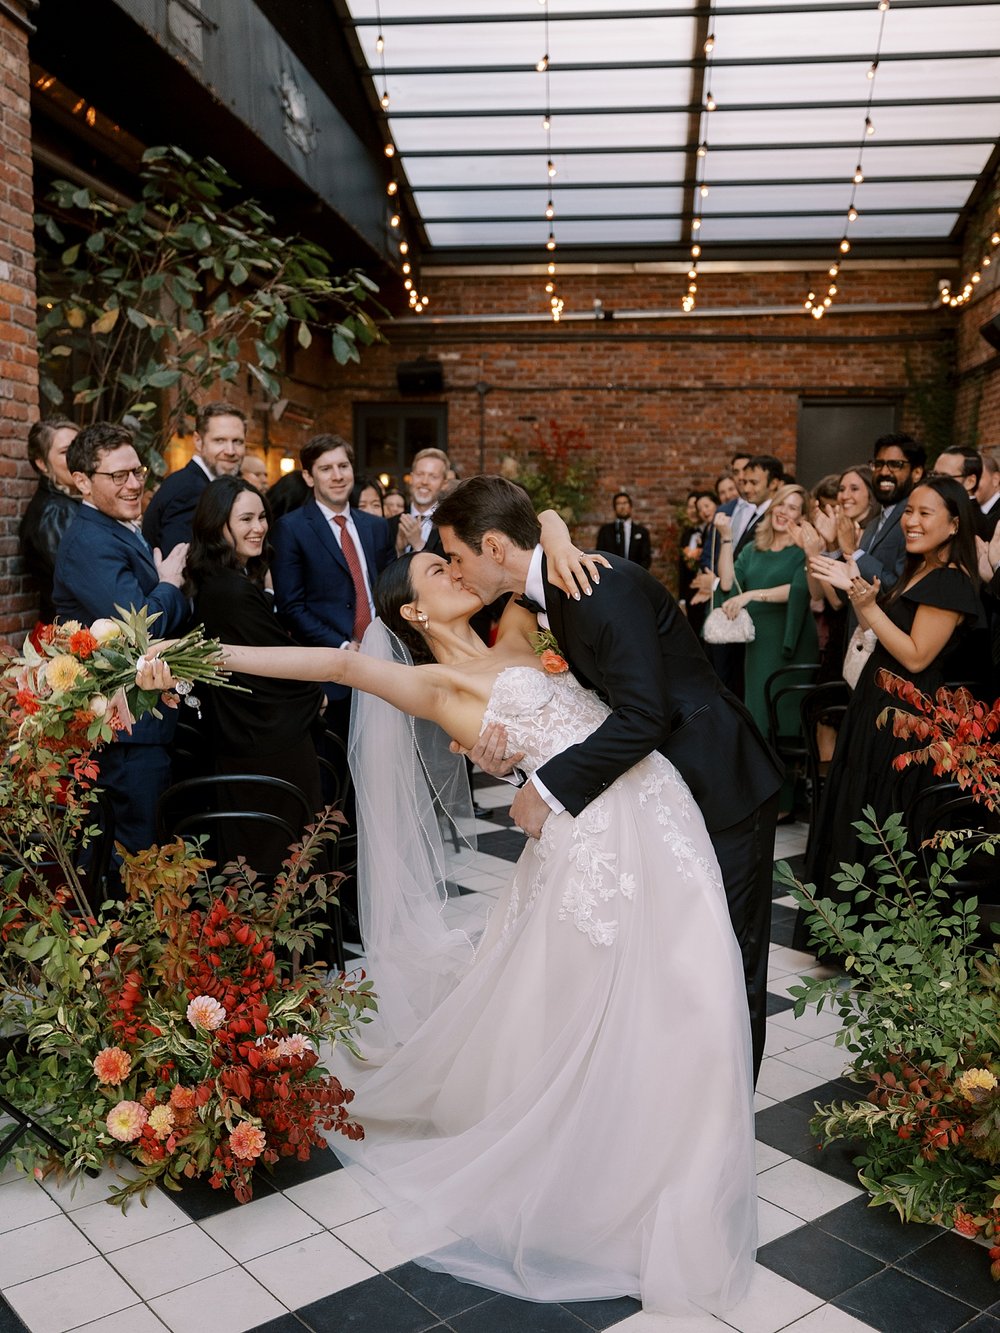 newlyweds kiss after ceremony at the Wythe Hotel